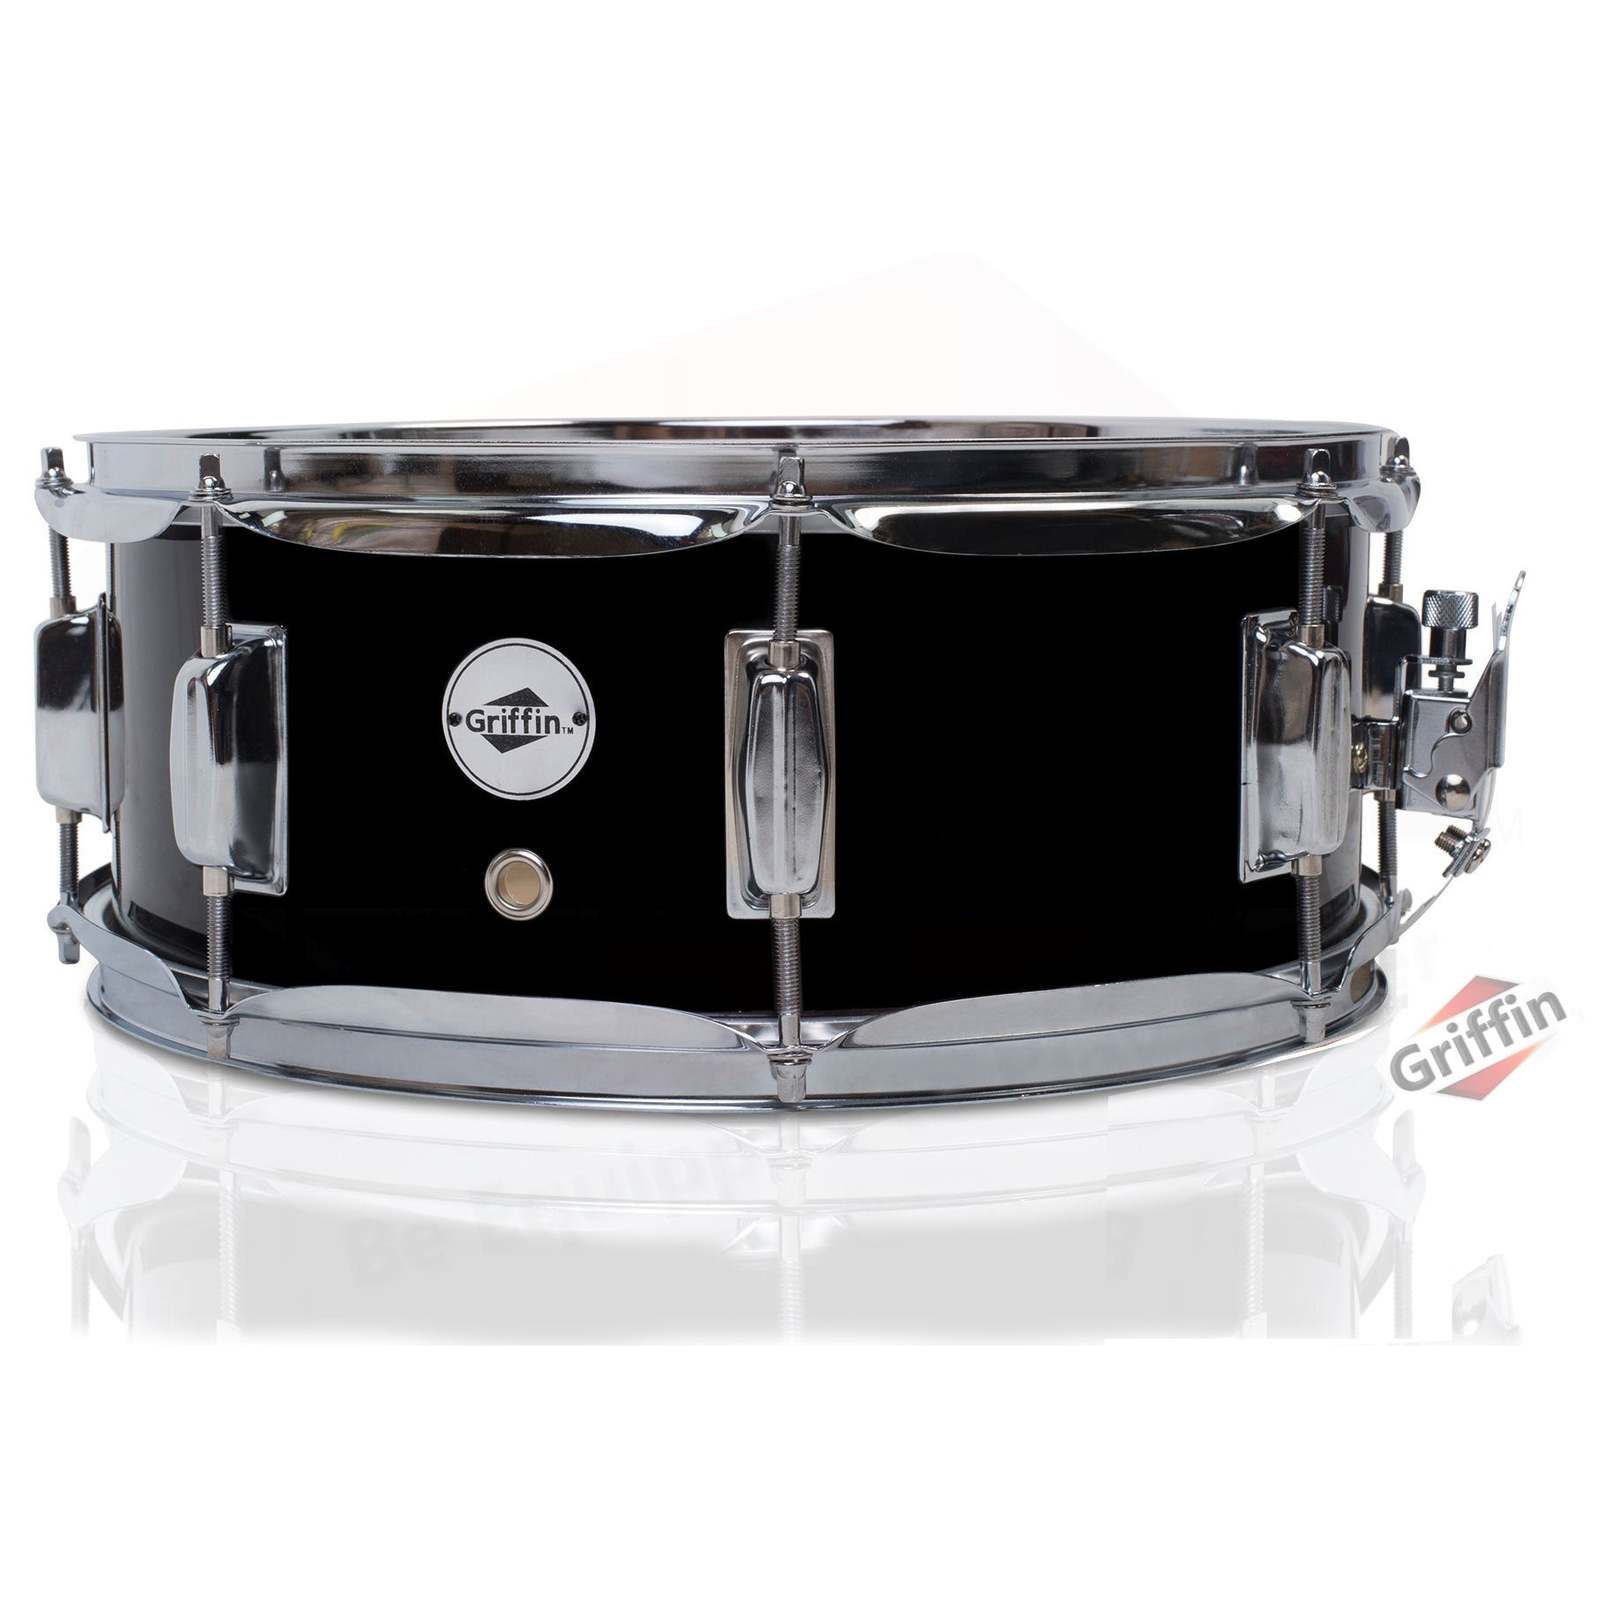 GRIFFIN Snare Drum - Poplar Wood Shell 14" x 5.5" with Black PVC & Coated Head - - $49.95